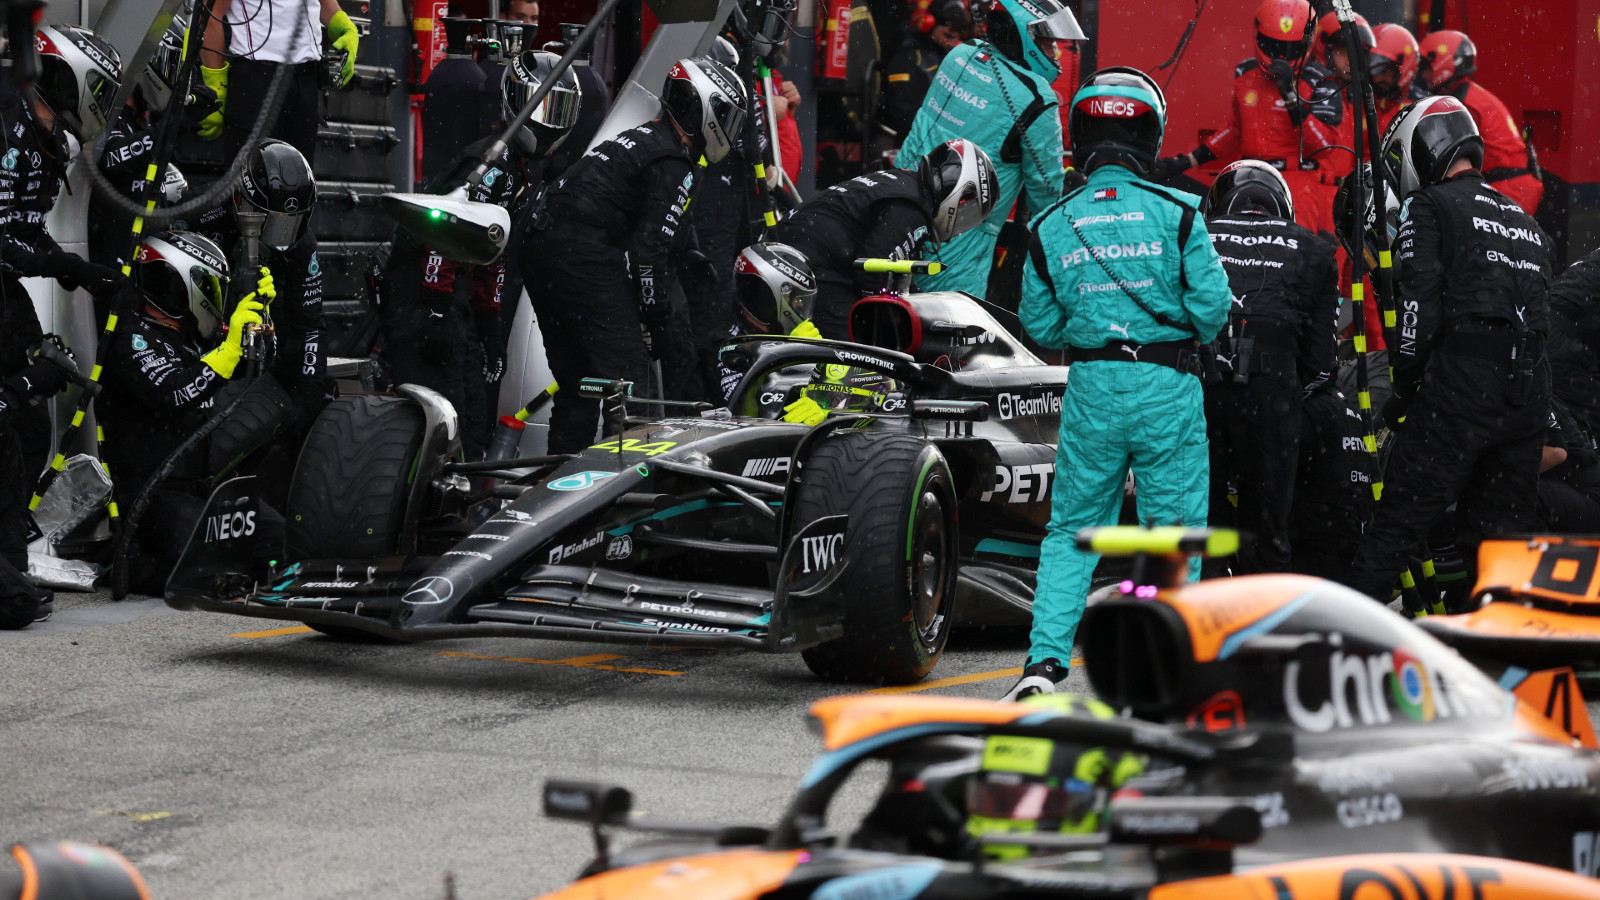 Lewis Hamilton, Mercedes F1 driver, makes a pitstop during the Dutch Grand Prix at Zandvoort.